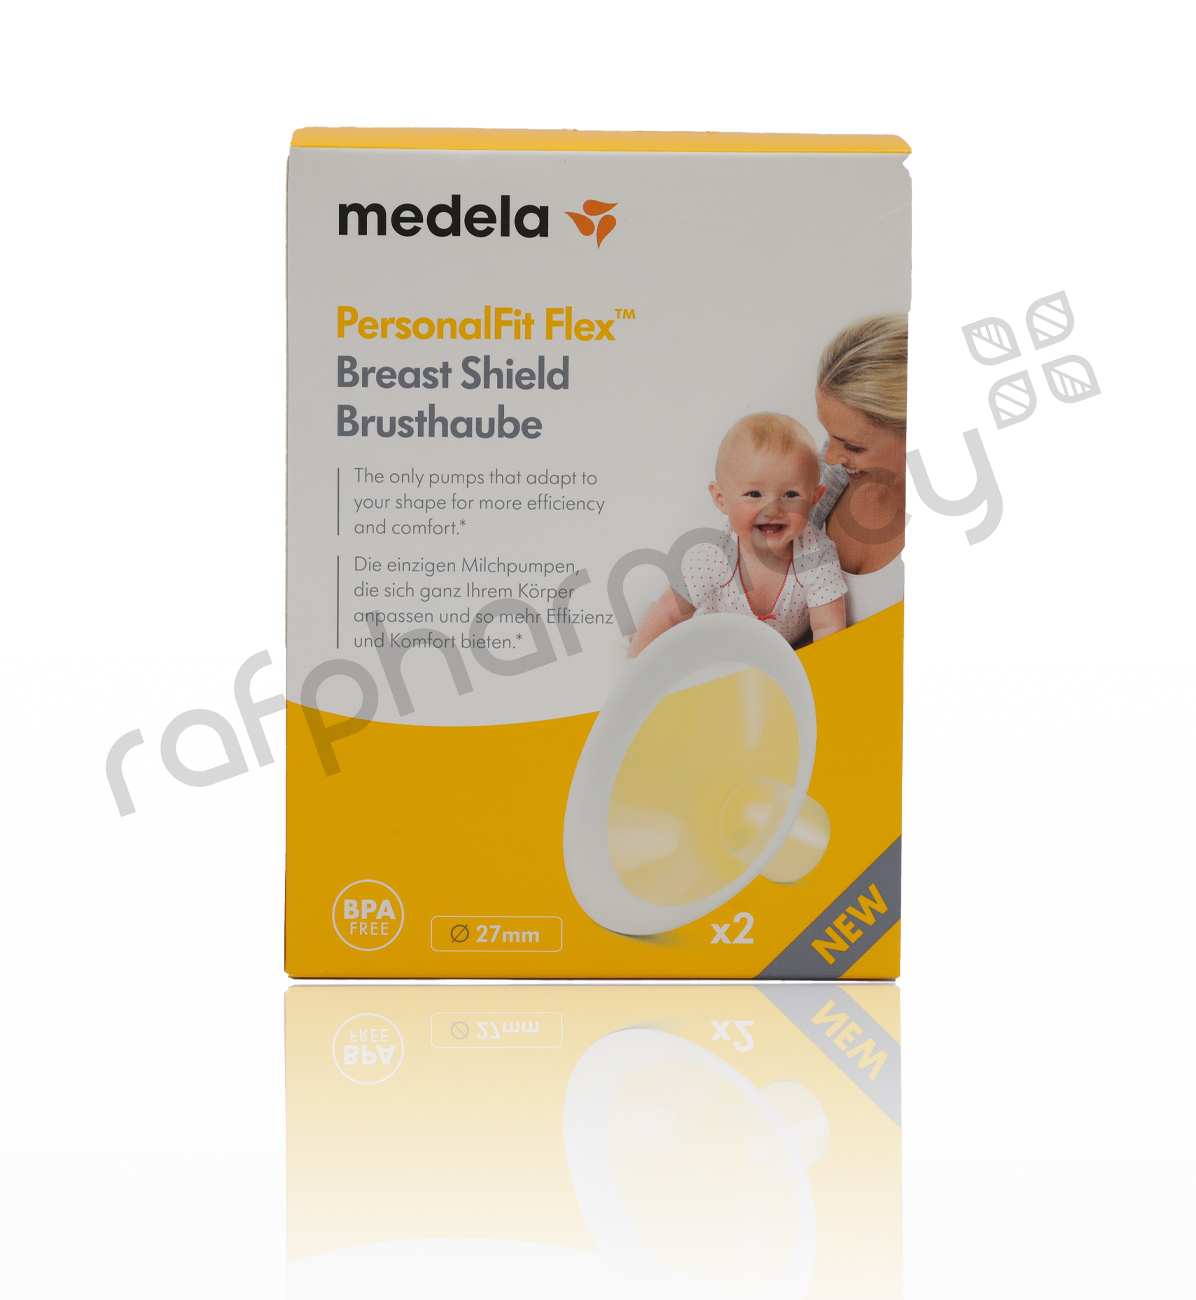 Buy Medela Freestyle Hands-Free Breast Pump Online Only Online at Chemist  Warehouse®